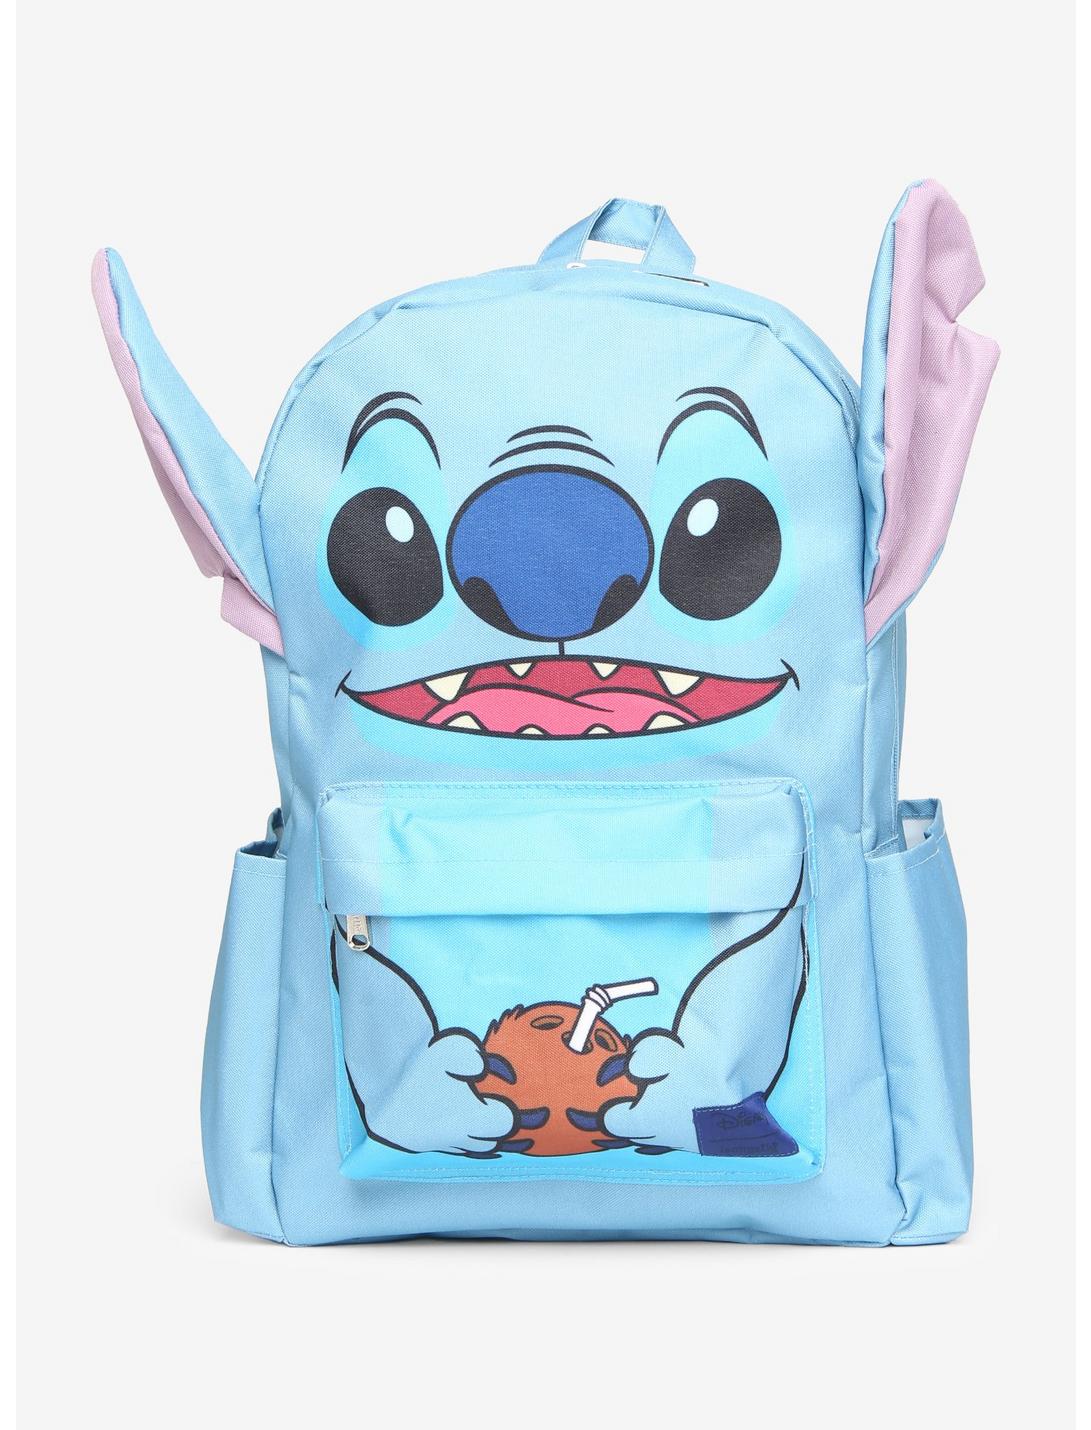 Funko Disney Loungefly Lilo & Stitch Frog Mini Backpack Hot Topic Exclusive NWT 